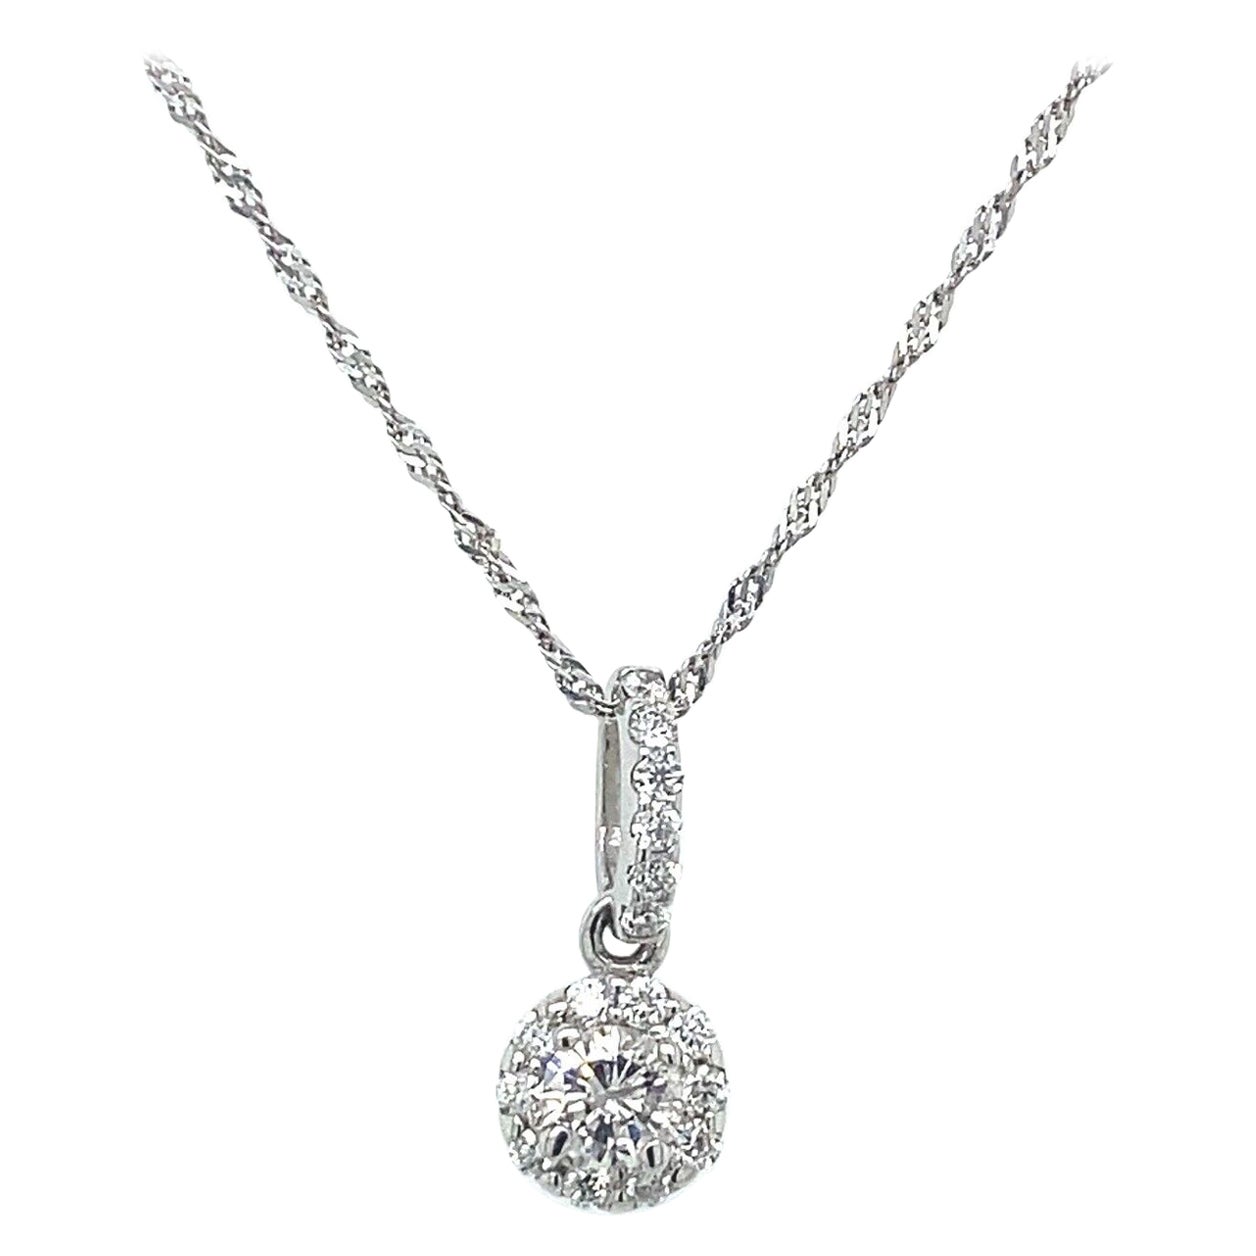 Necklace Set with 0.30ct Natural Round Brilliant Cut Diamonds in 18ct White Gold